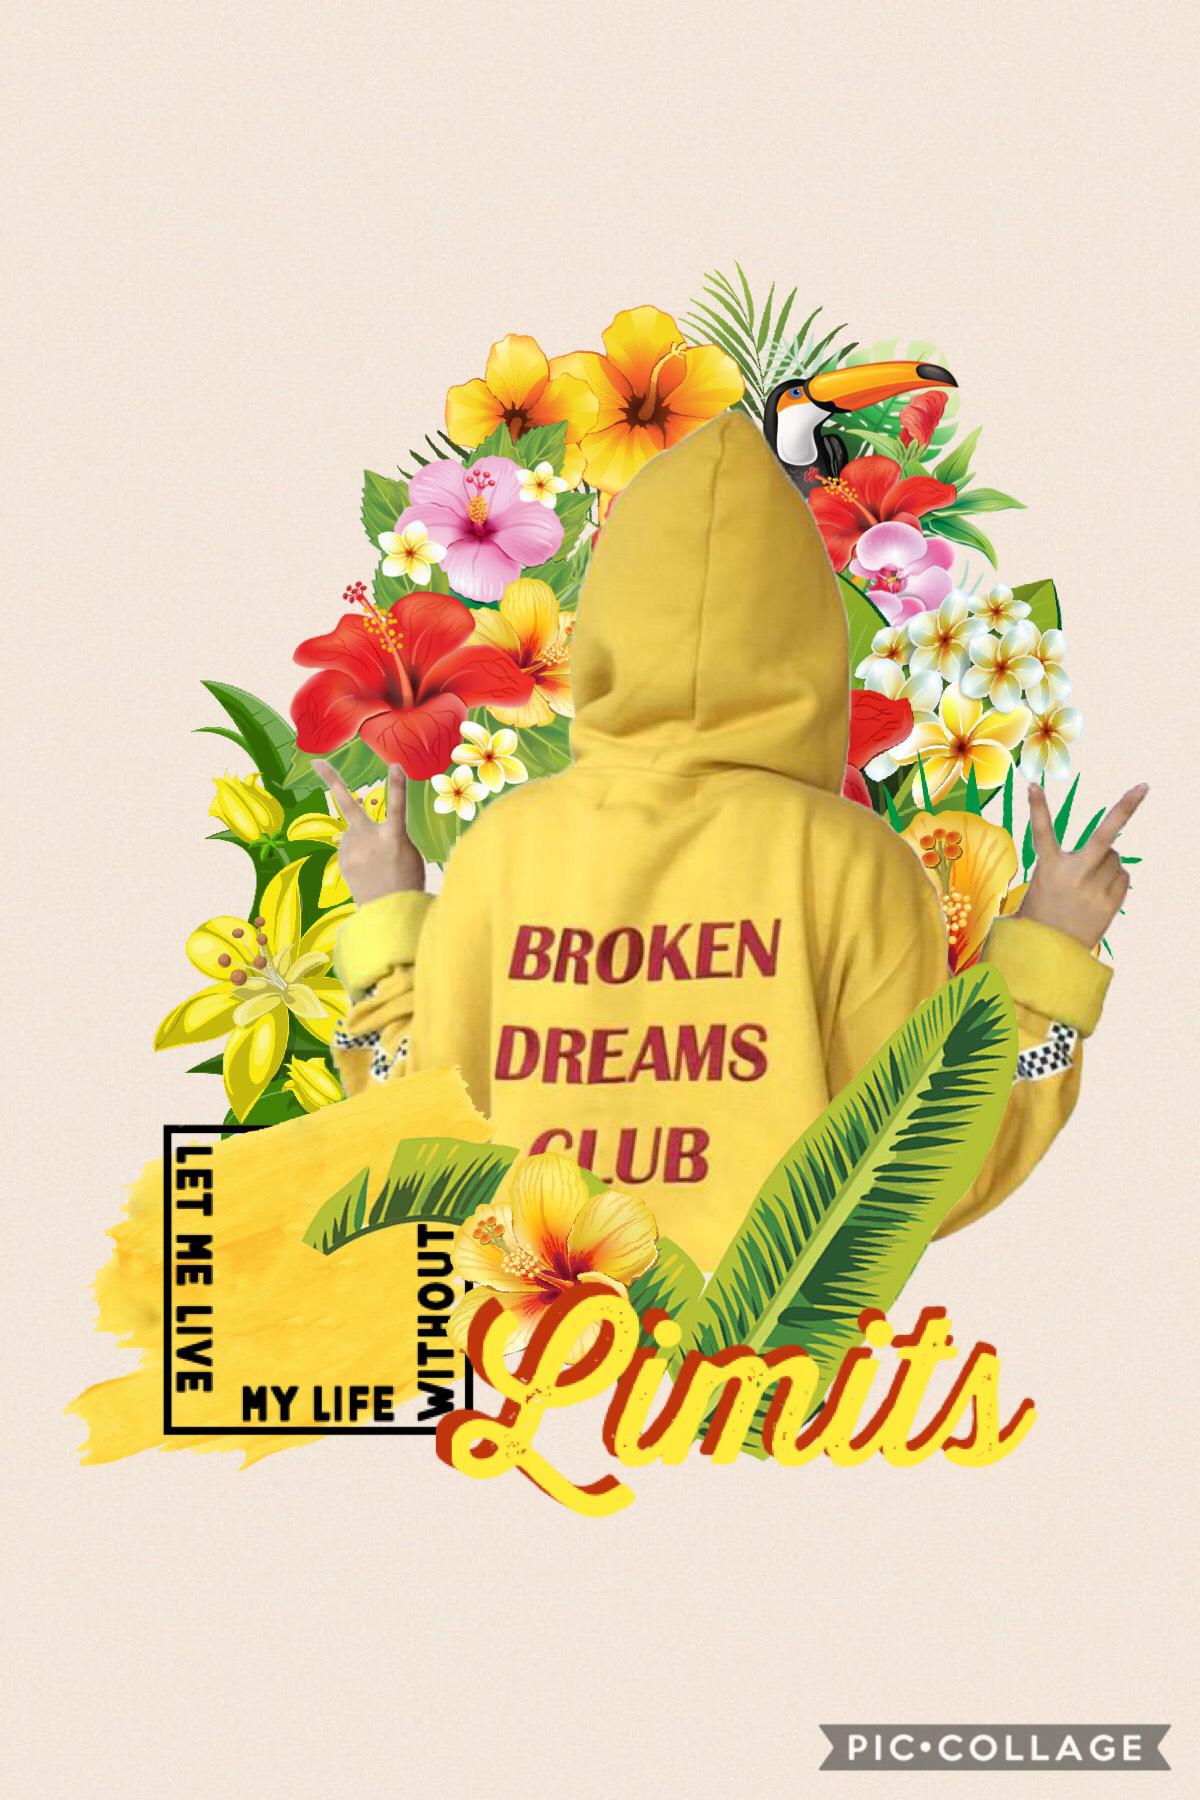 t a p
The message of this collage is not to give up on your dreams but to show that dreams can be broken and I guess we just have to grow from the struggle and besides misery like company. Also it’s yellow 💛💛💛